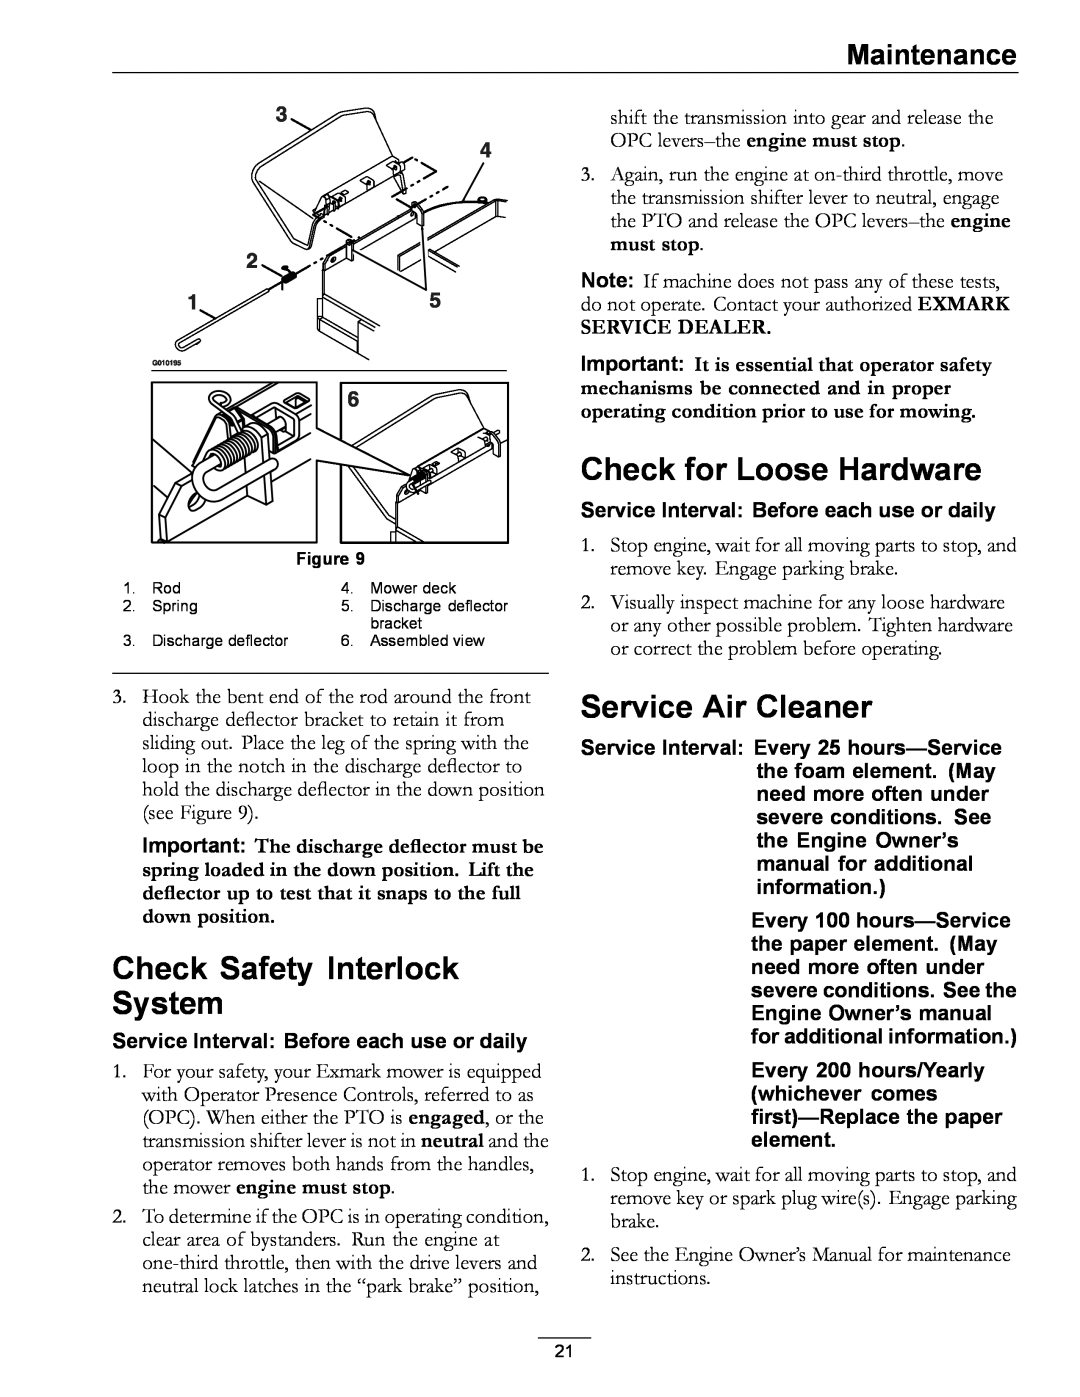 Exmark 4500-689 Check Safety Interlock System, Check for Loose Hardware, Service Air Cleaner, Service Dealer, Maintenance 